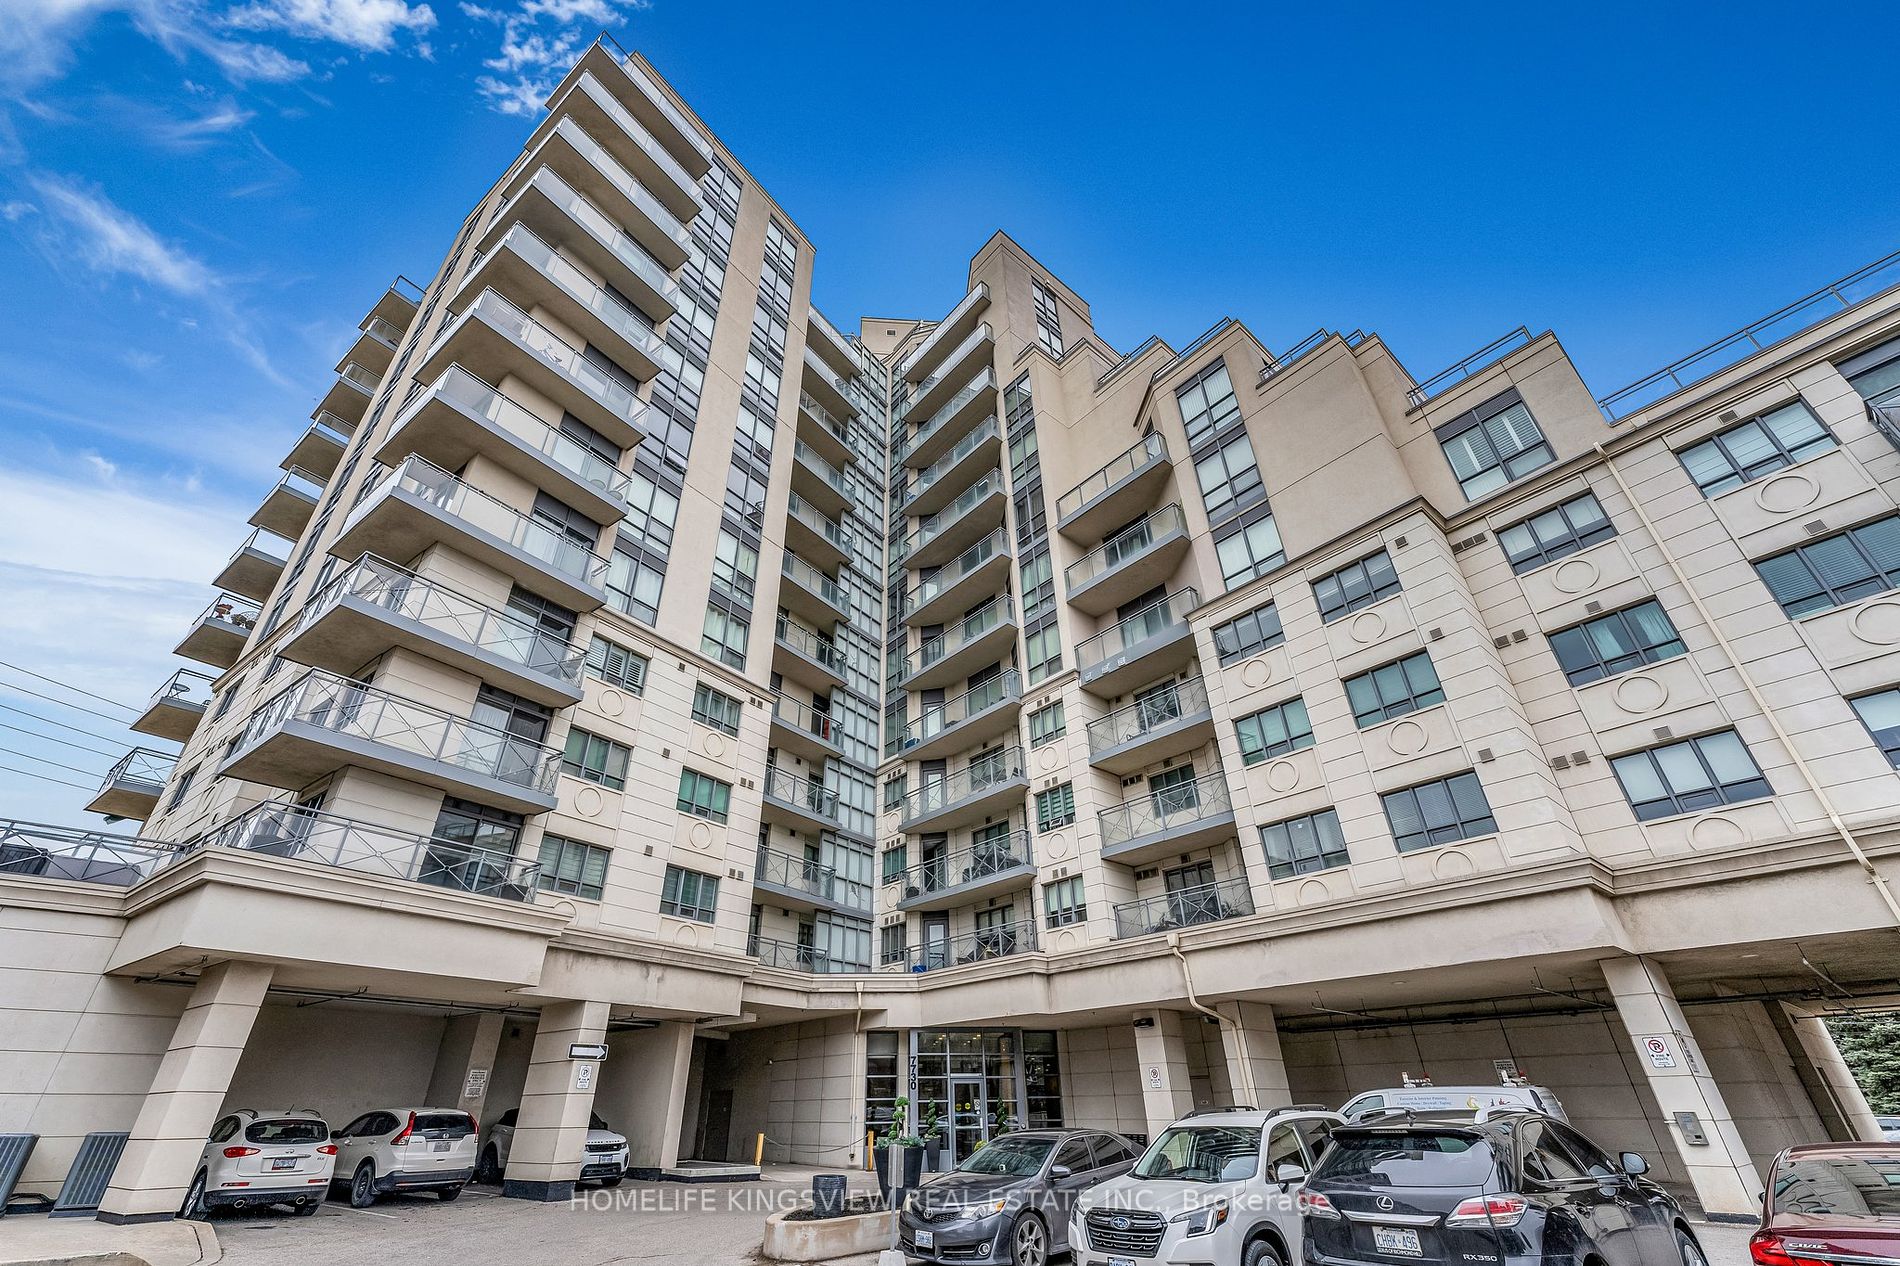 Condo Apt house for sale at 7730 Kipling Ave Vaughan Ontario